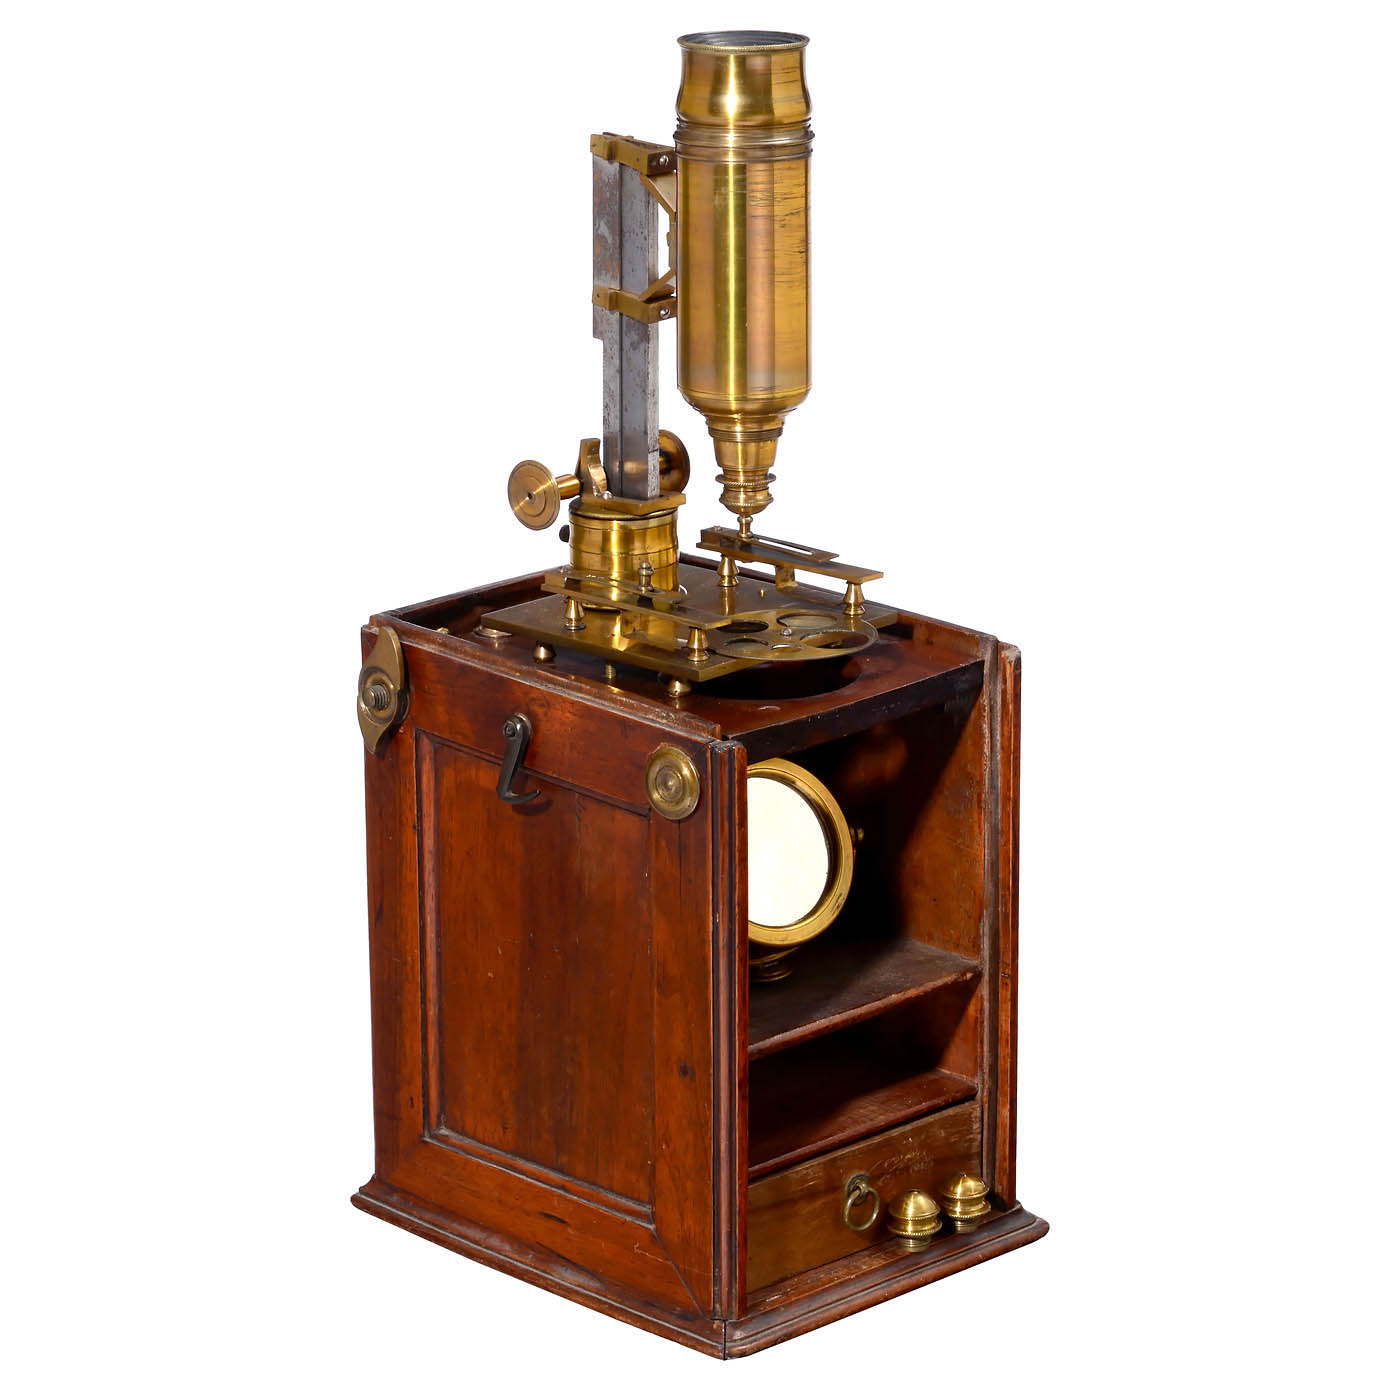 French Box Microscope, c. 1760 - Image 5 of 9